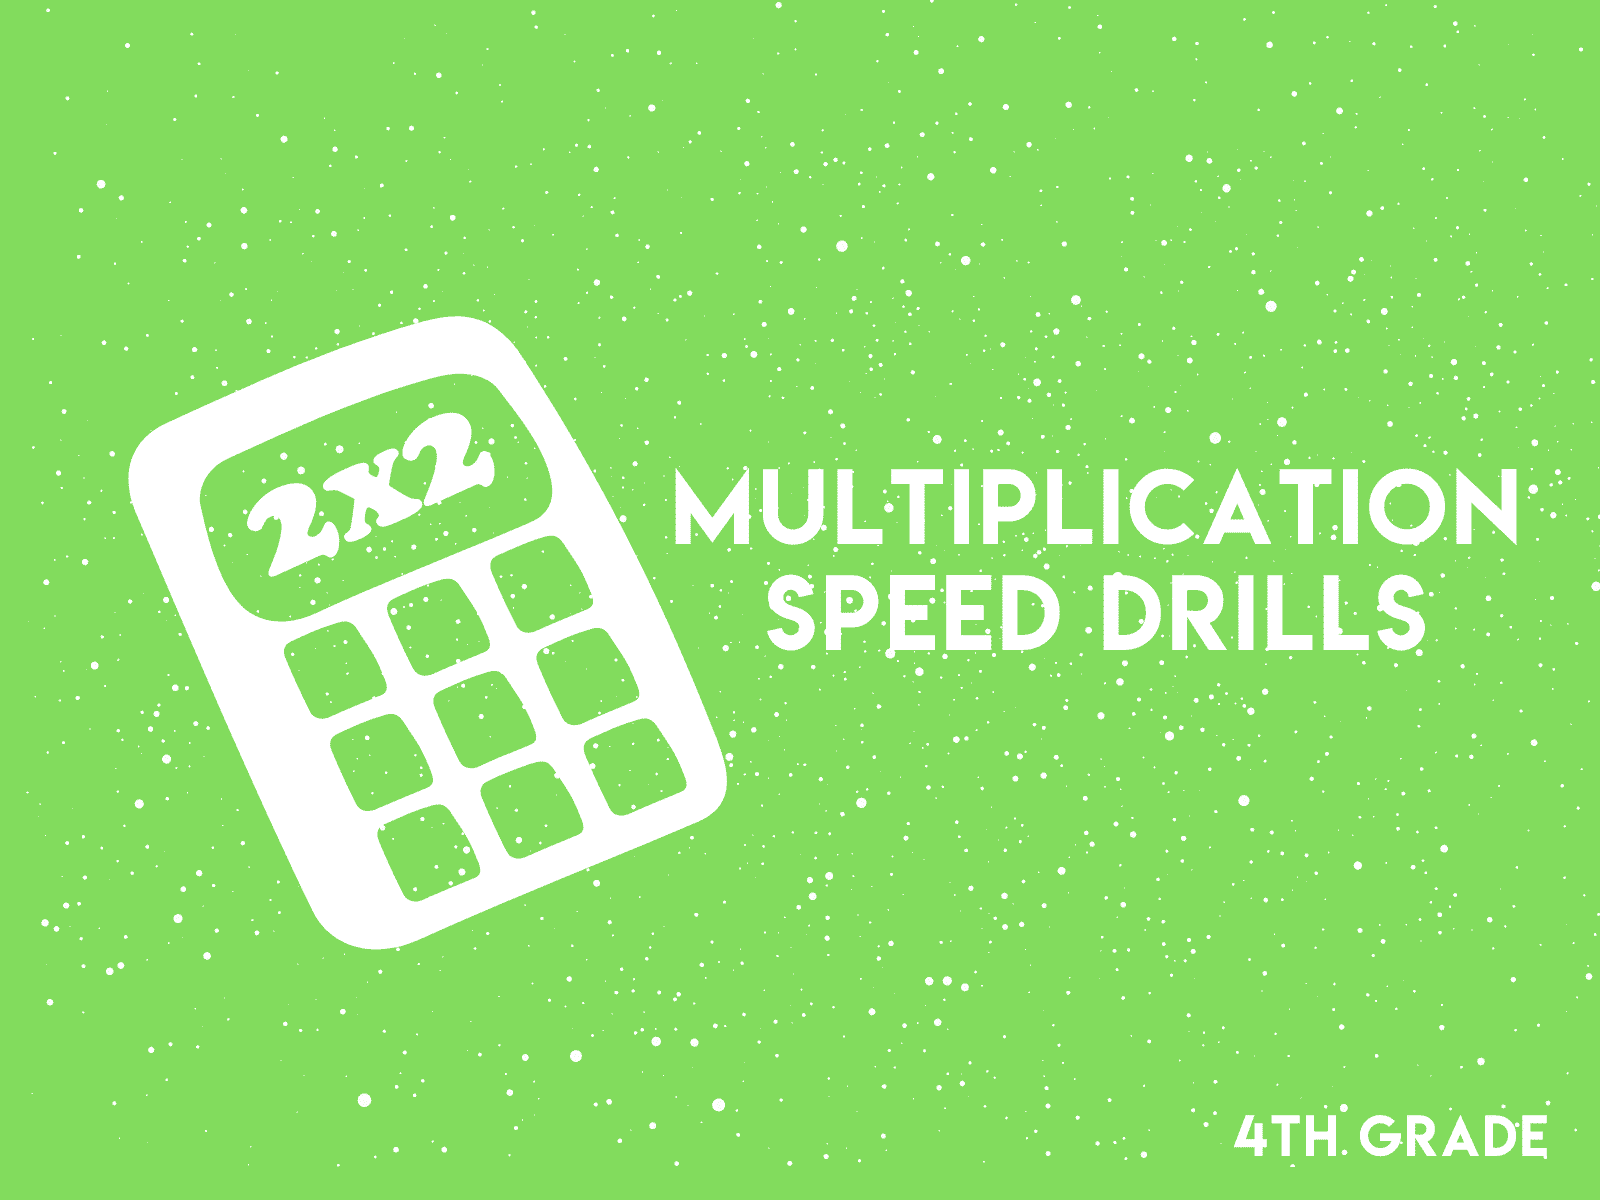 Multiplication speed drills for fourth graders.